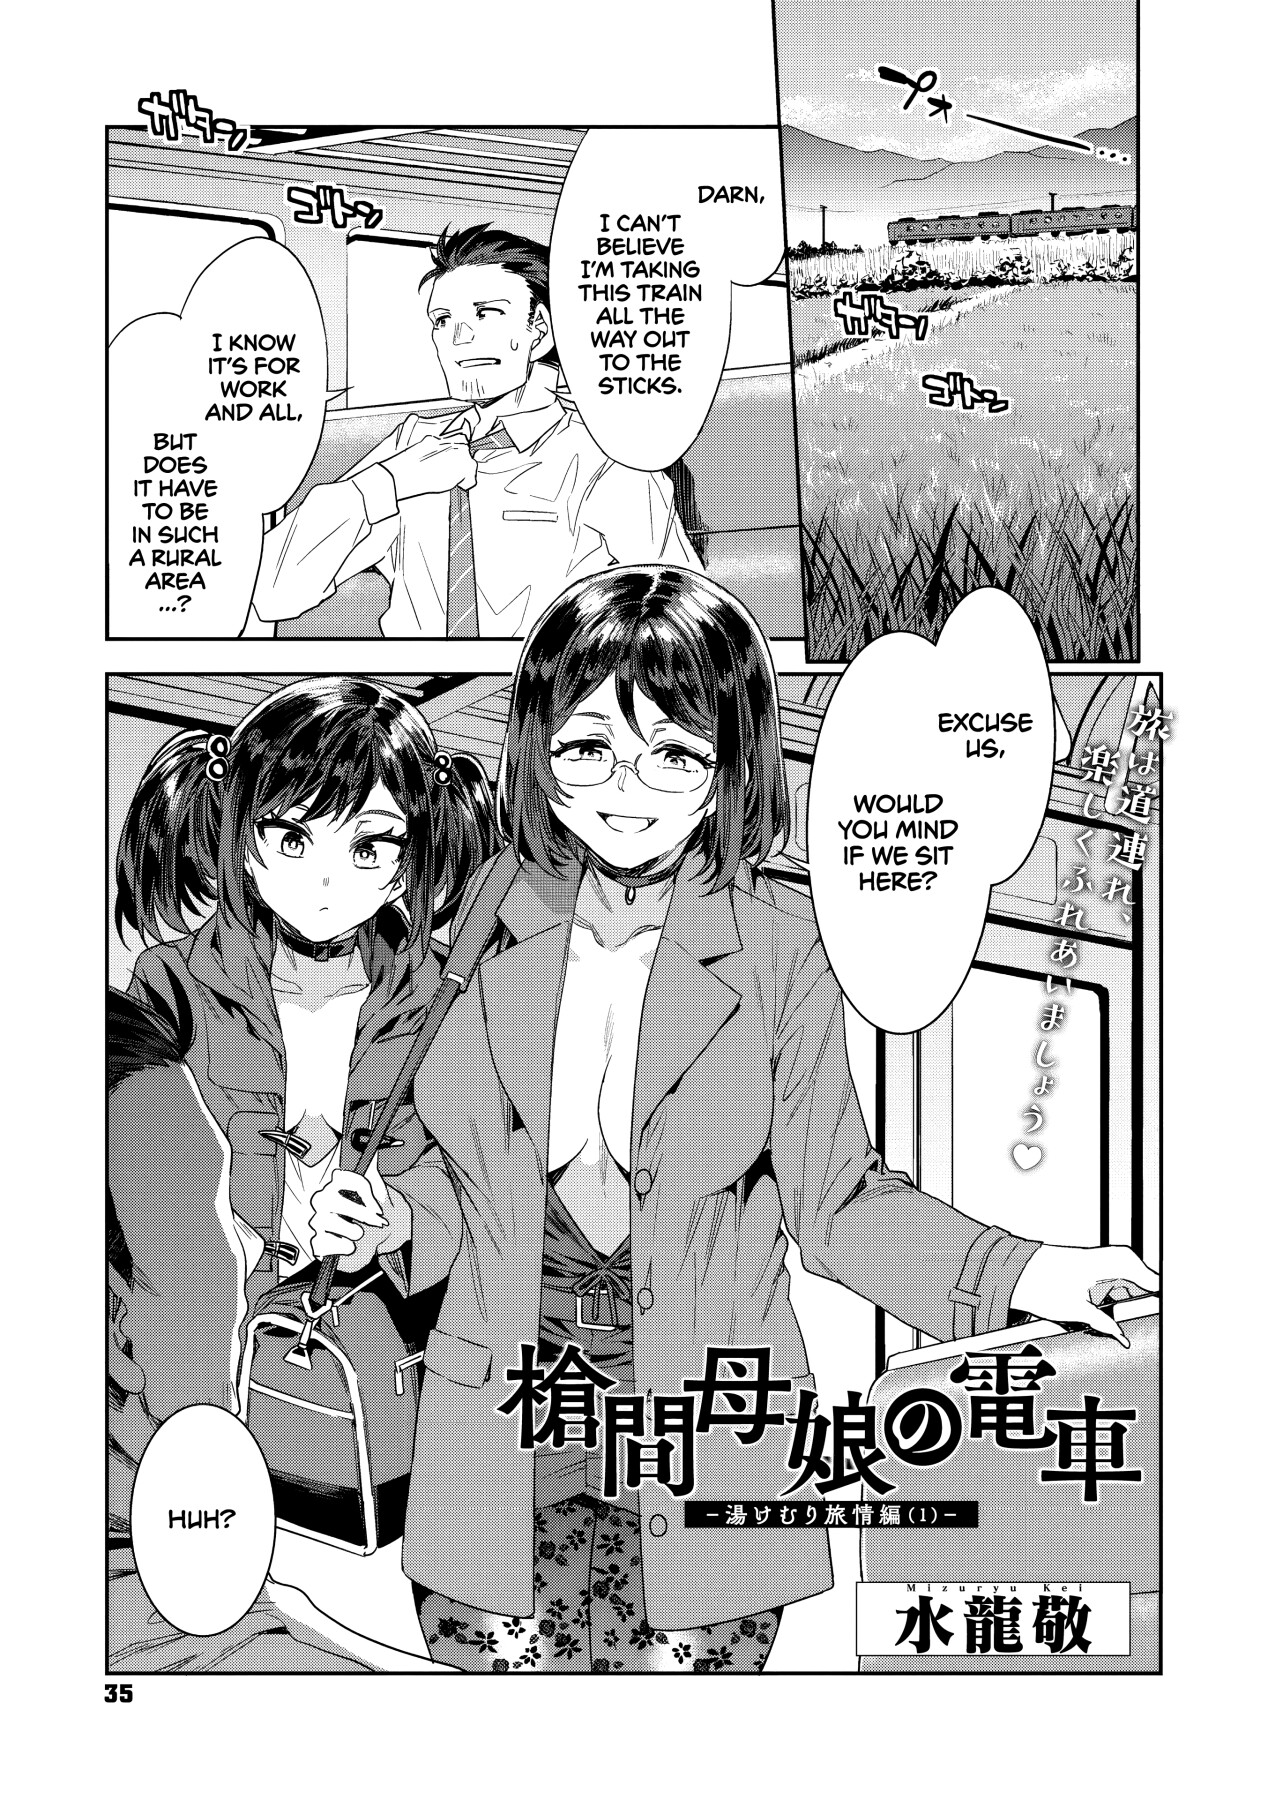 Hentai Manga Comic-The Souma Mother-Daughter Pair in the Train - Steamy Sexcapades,-Chapter 1-1